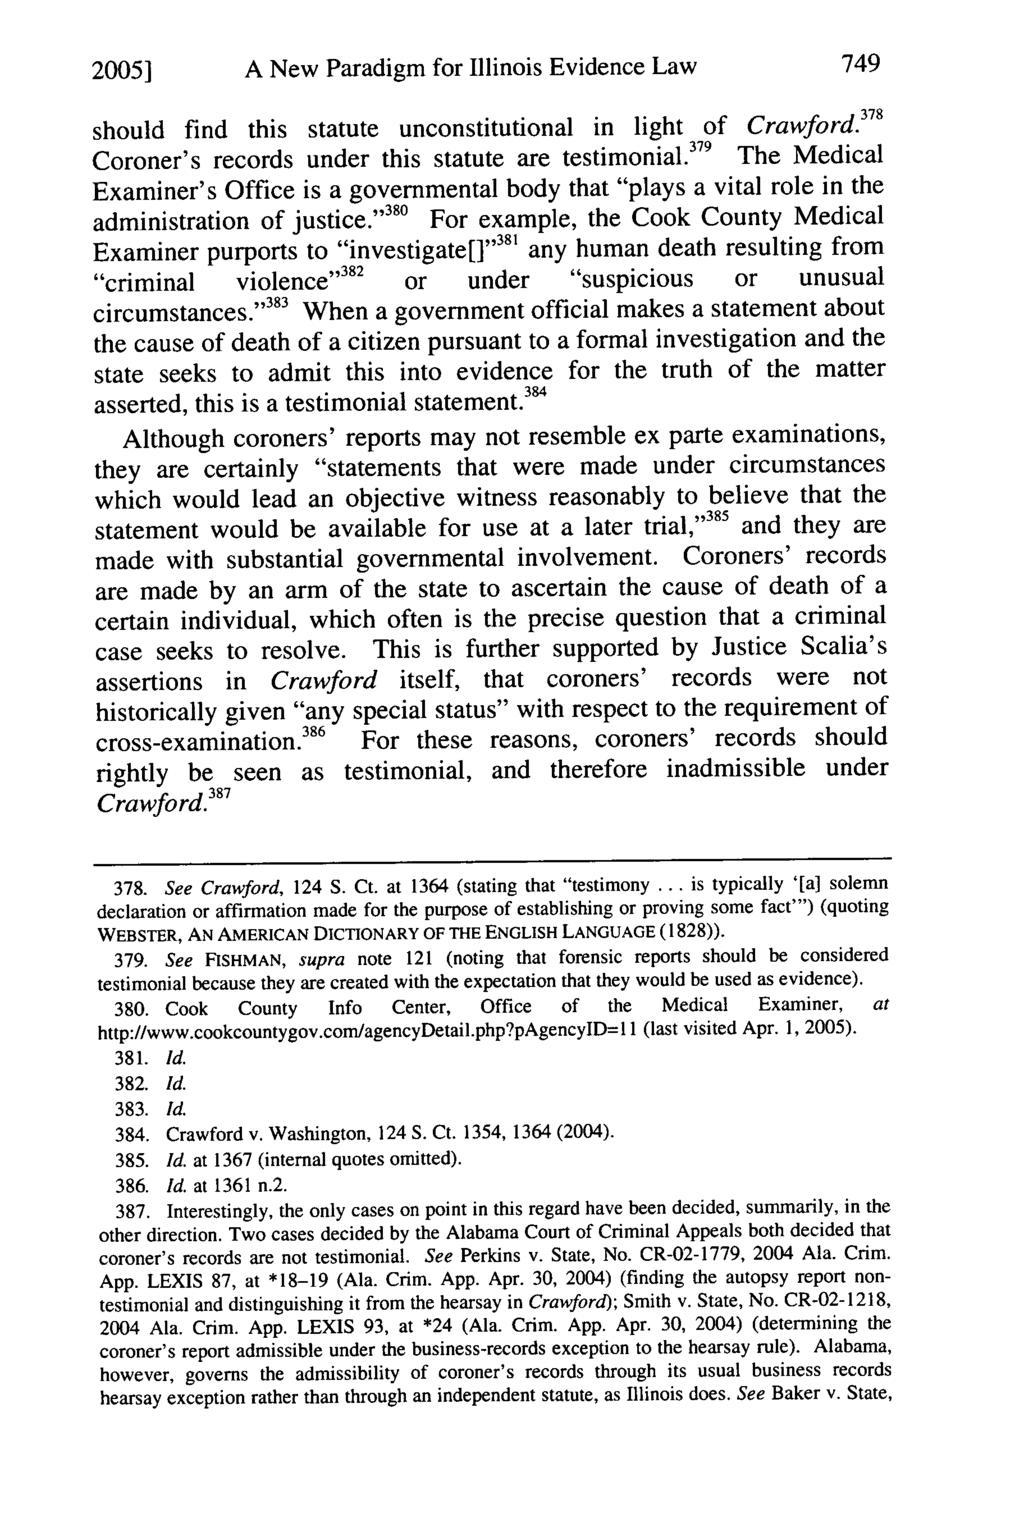 2005] A New Paradigm for Illinois Evidence Law should find this statute unconstitutional in light of Crawford.1 7 1 Coroner's records under this statute are testimonial.